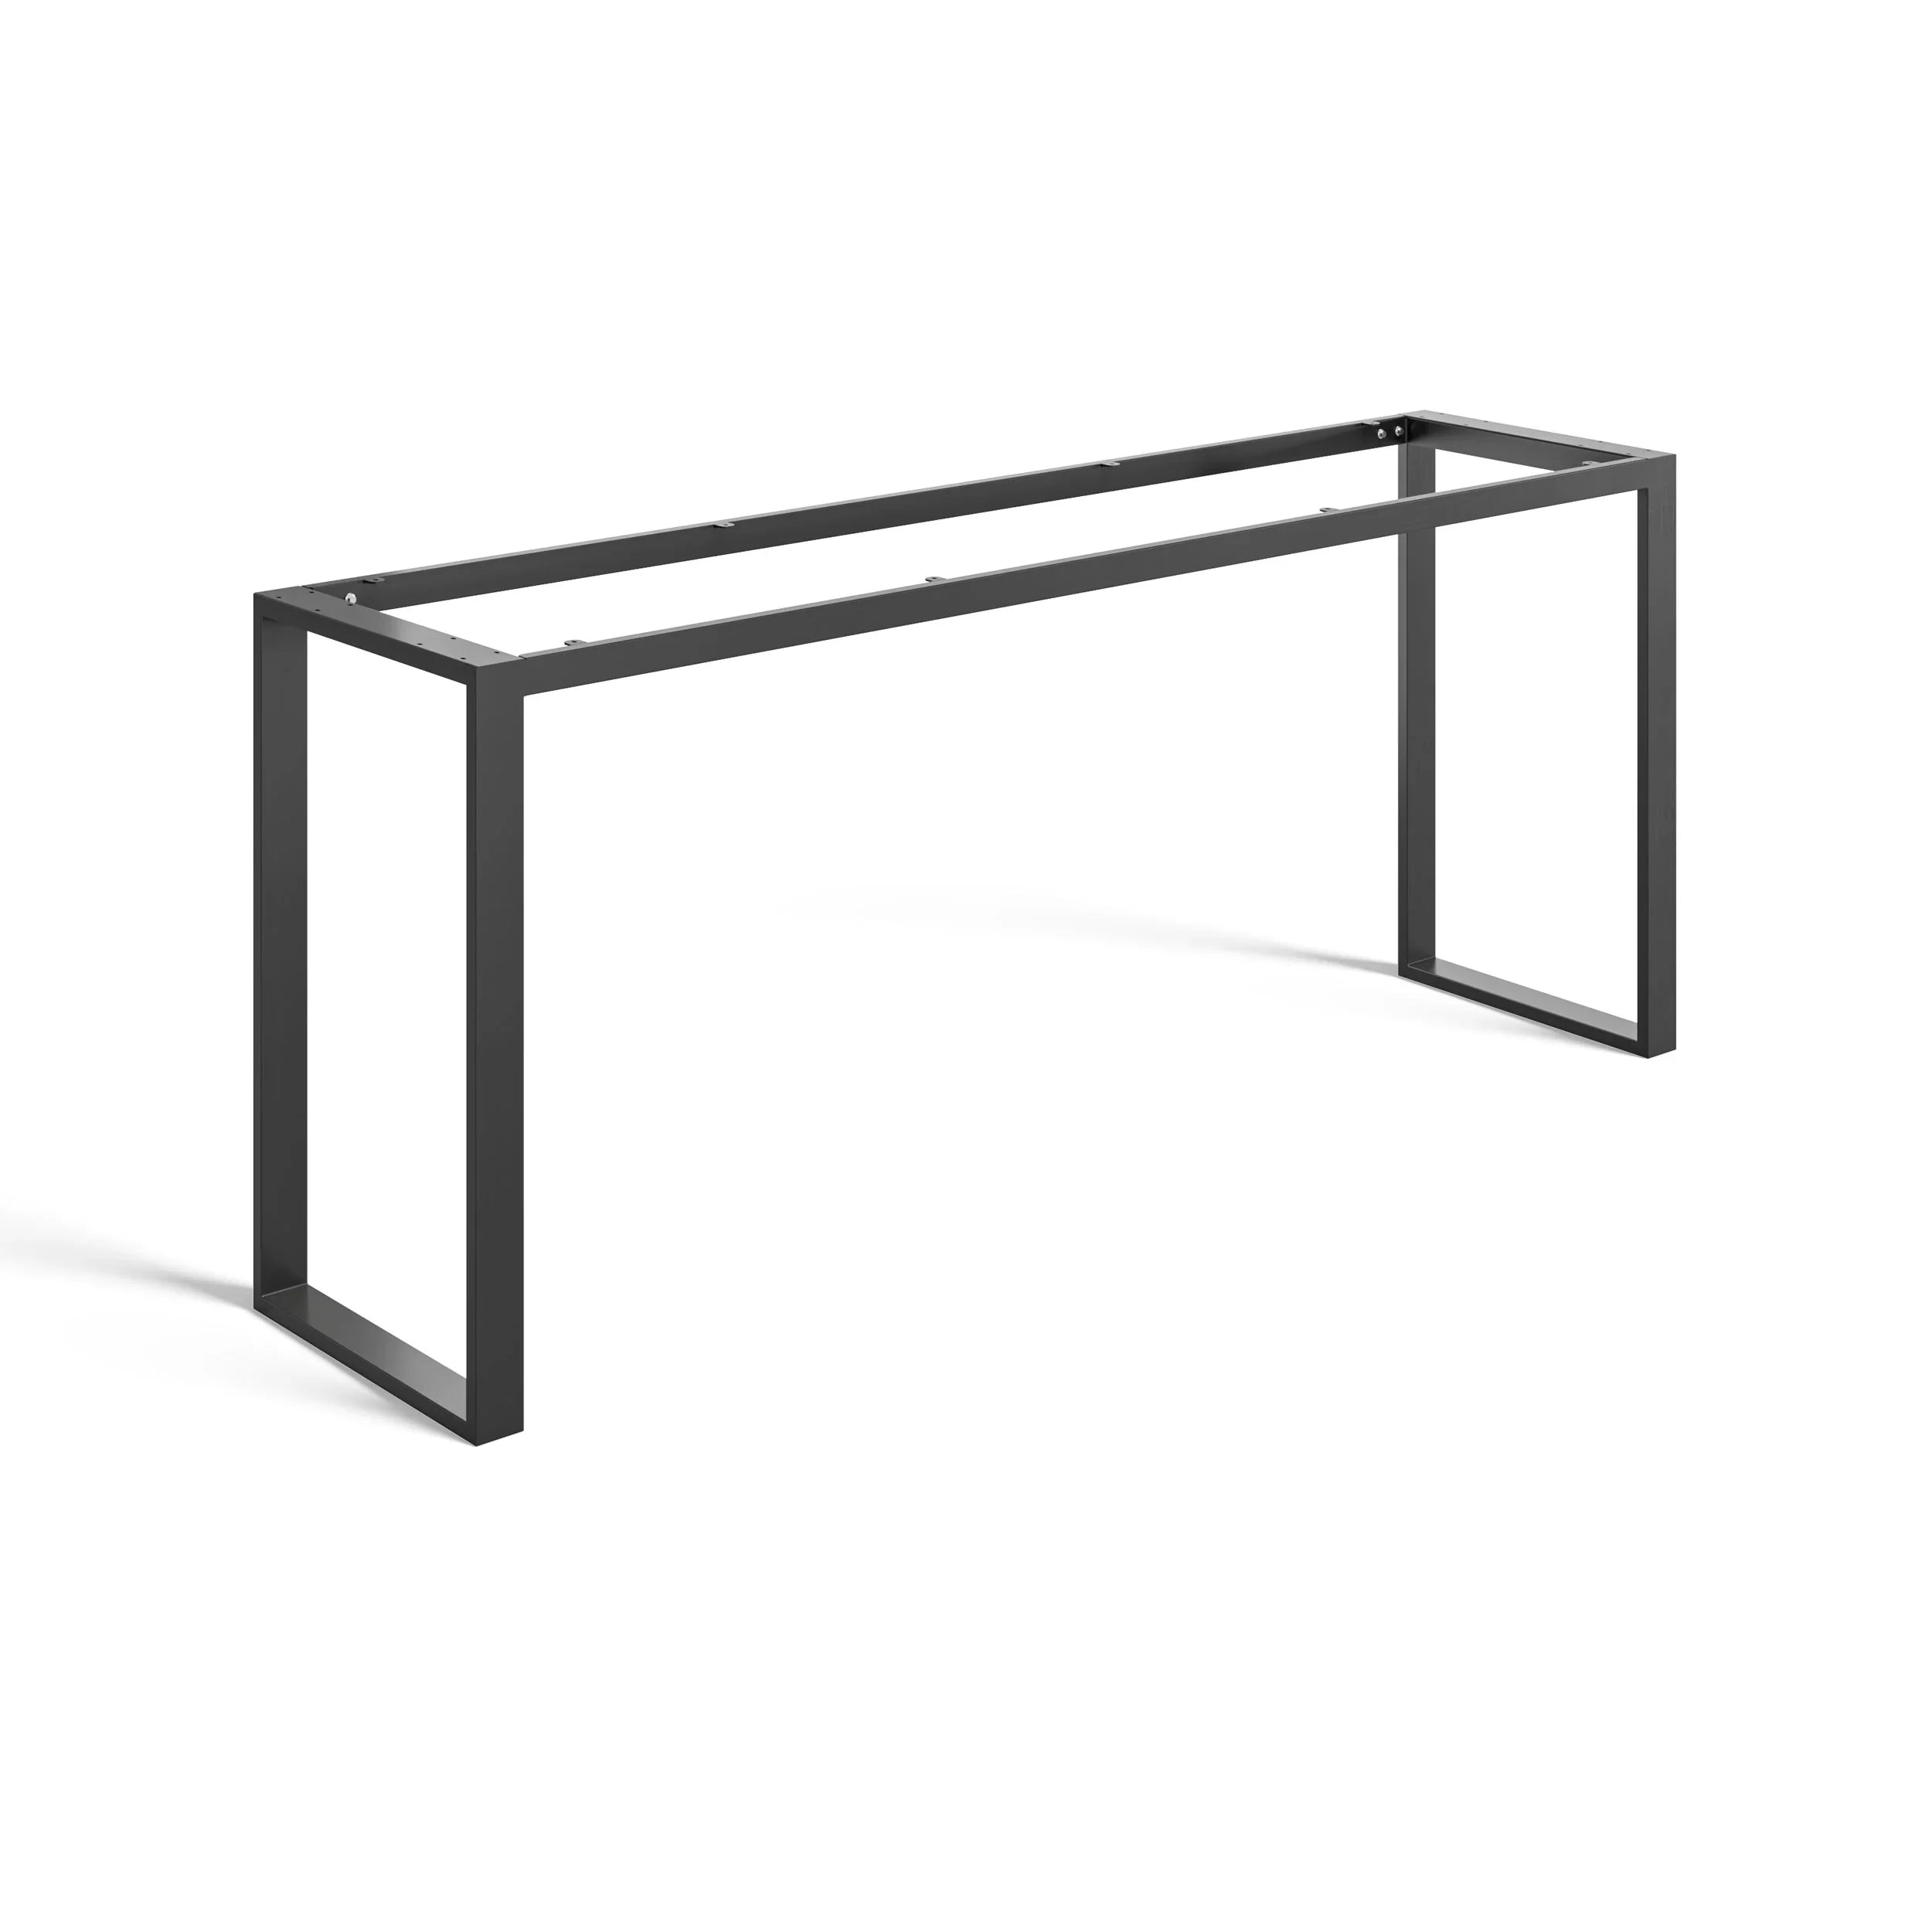 Bench Legs - Square Industrial Frame